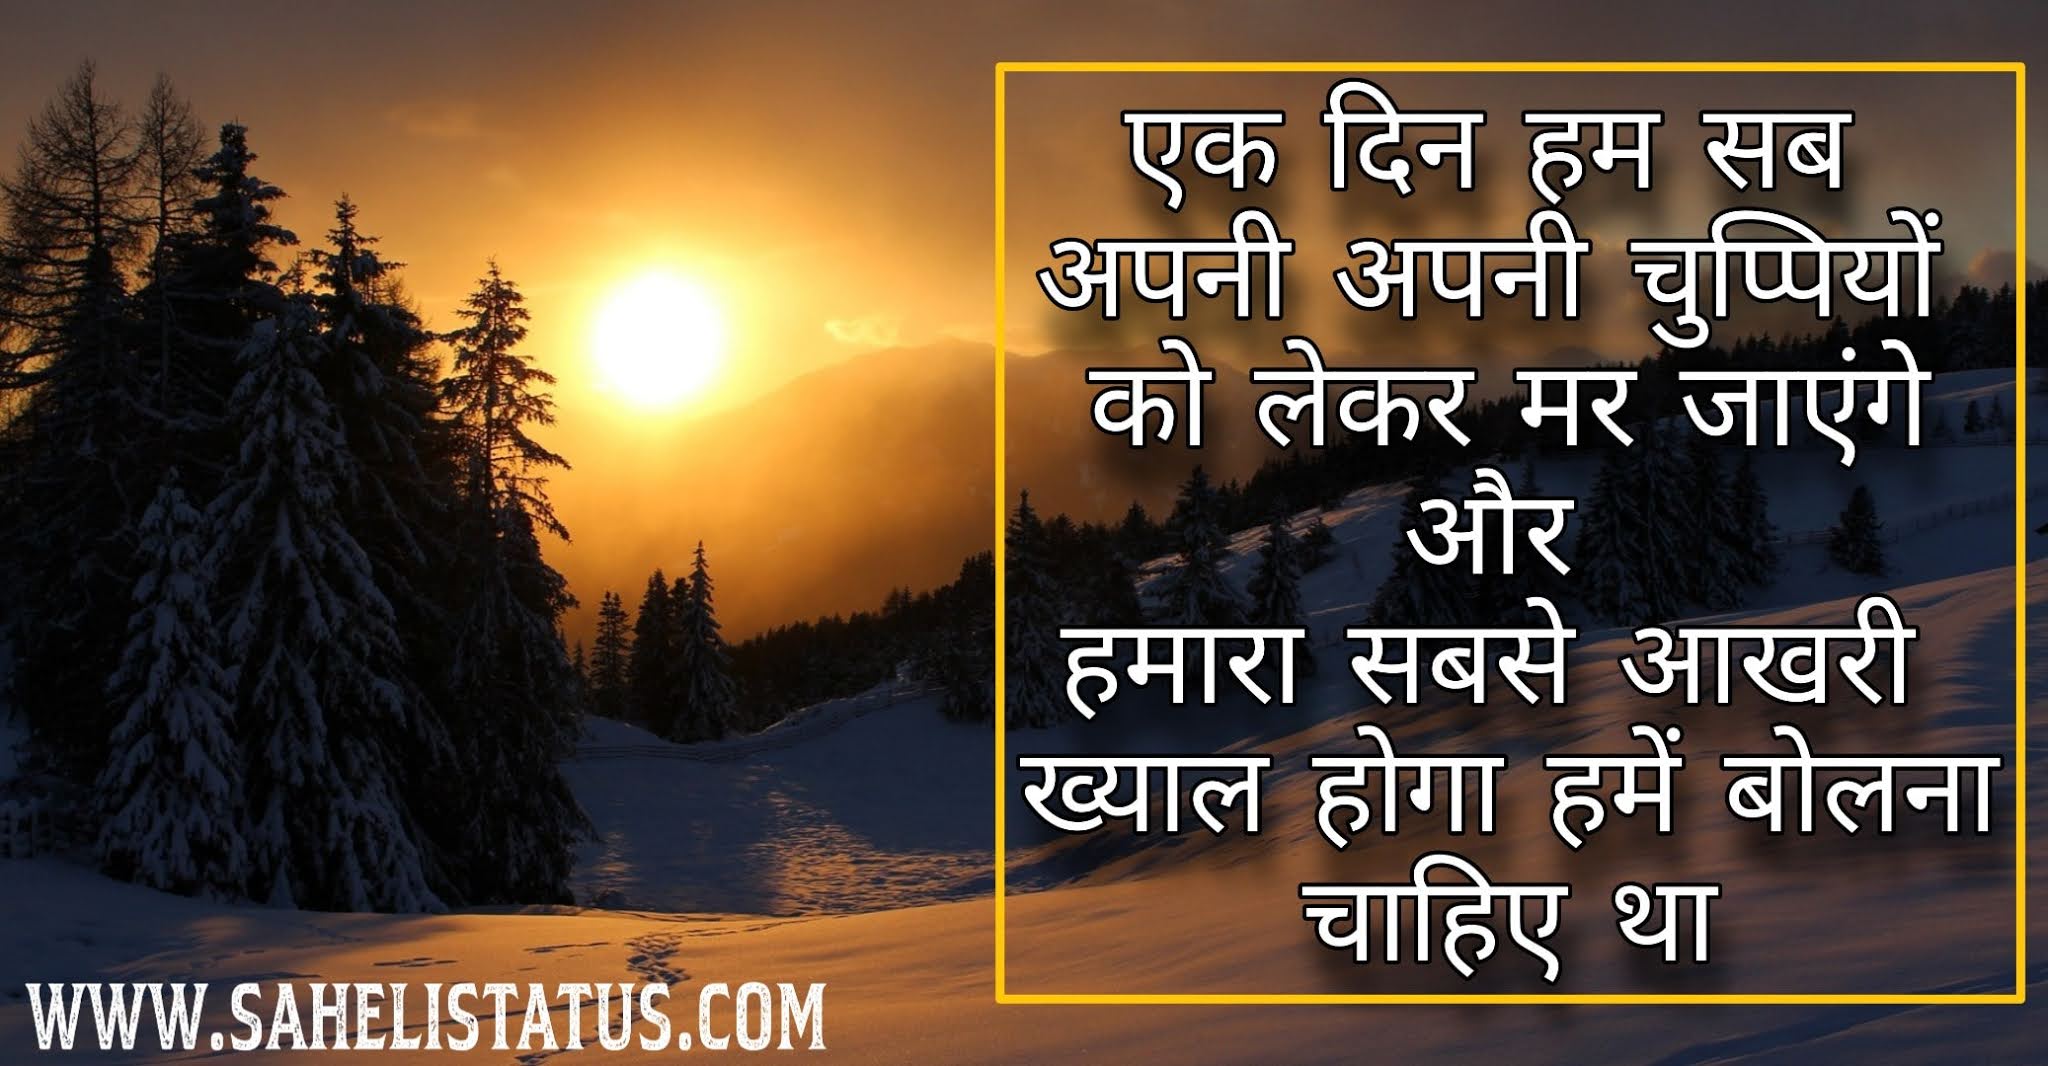 Good Morning Messages in hindi